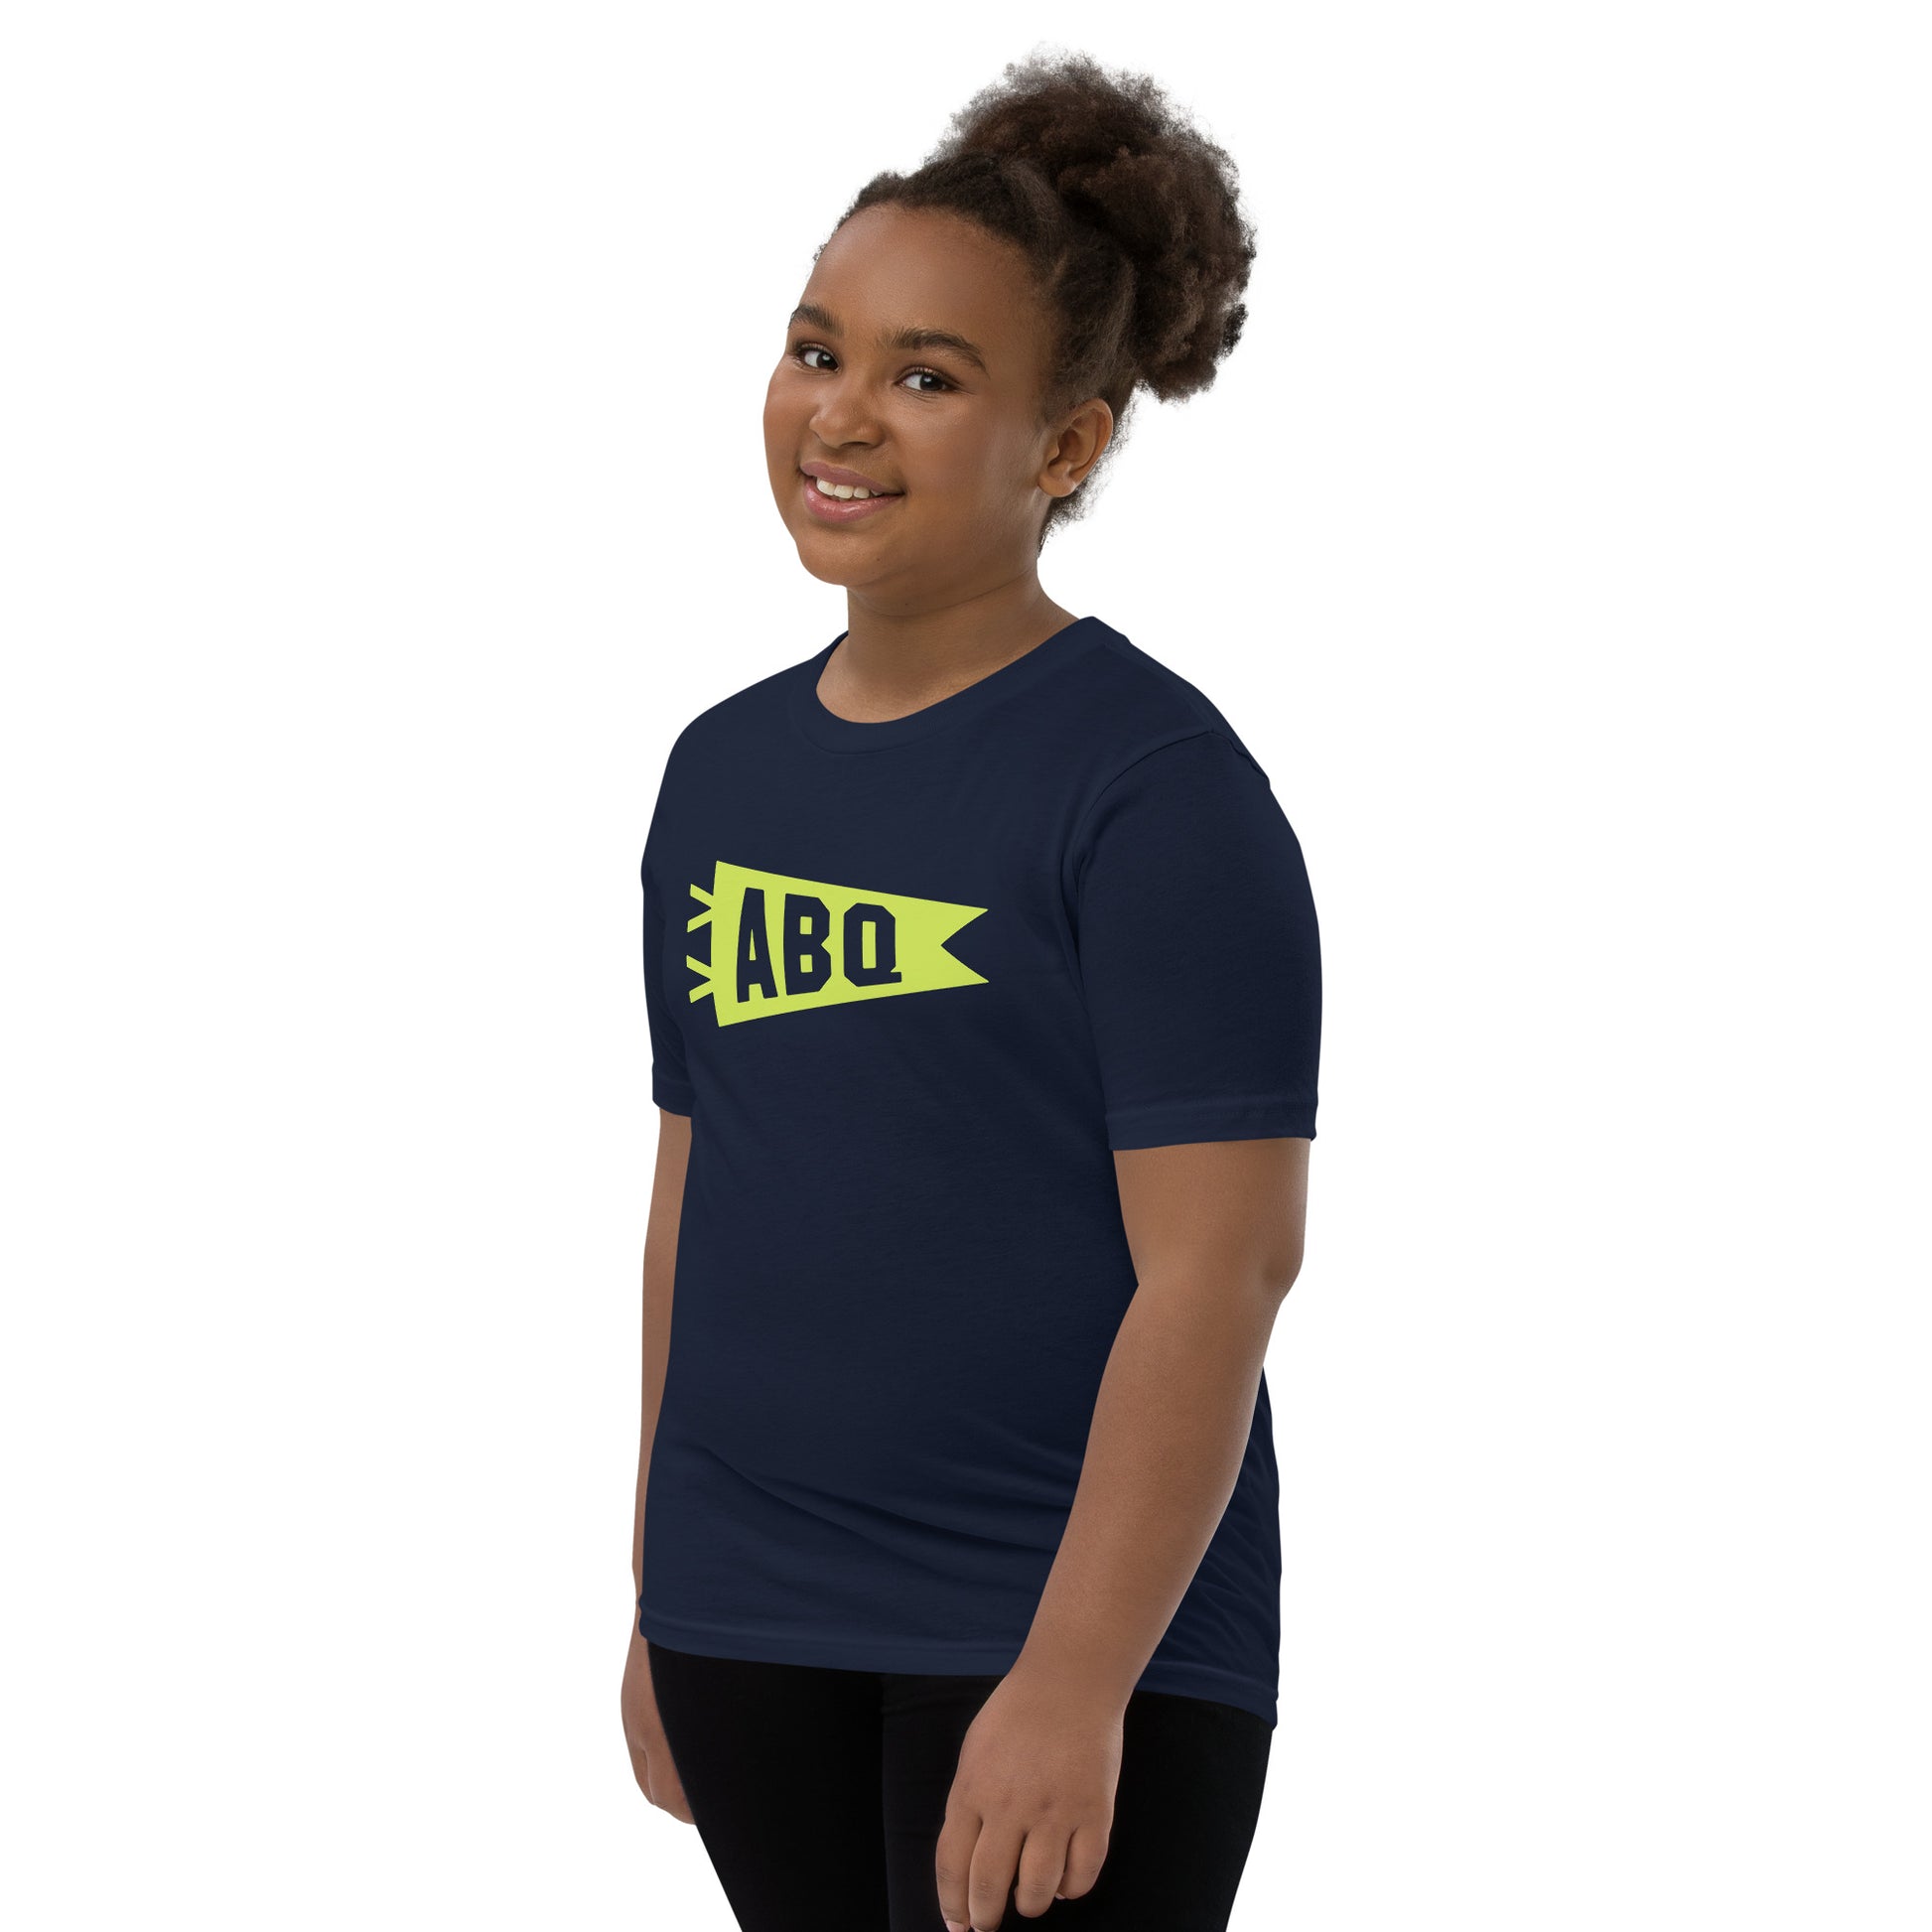 Kid's Airport Code Tee - Green Graphic • ABQ Albuquerque • YHM Designs - Image 04